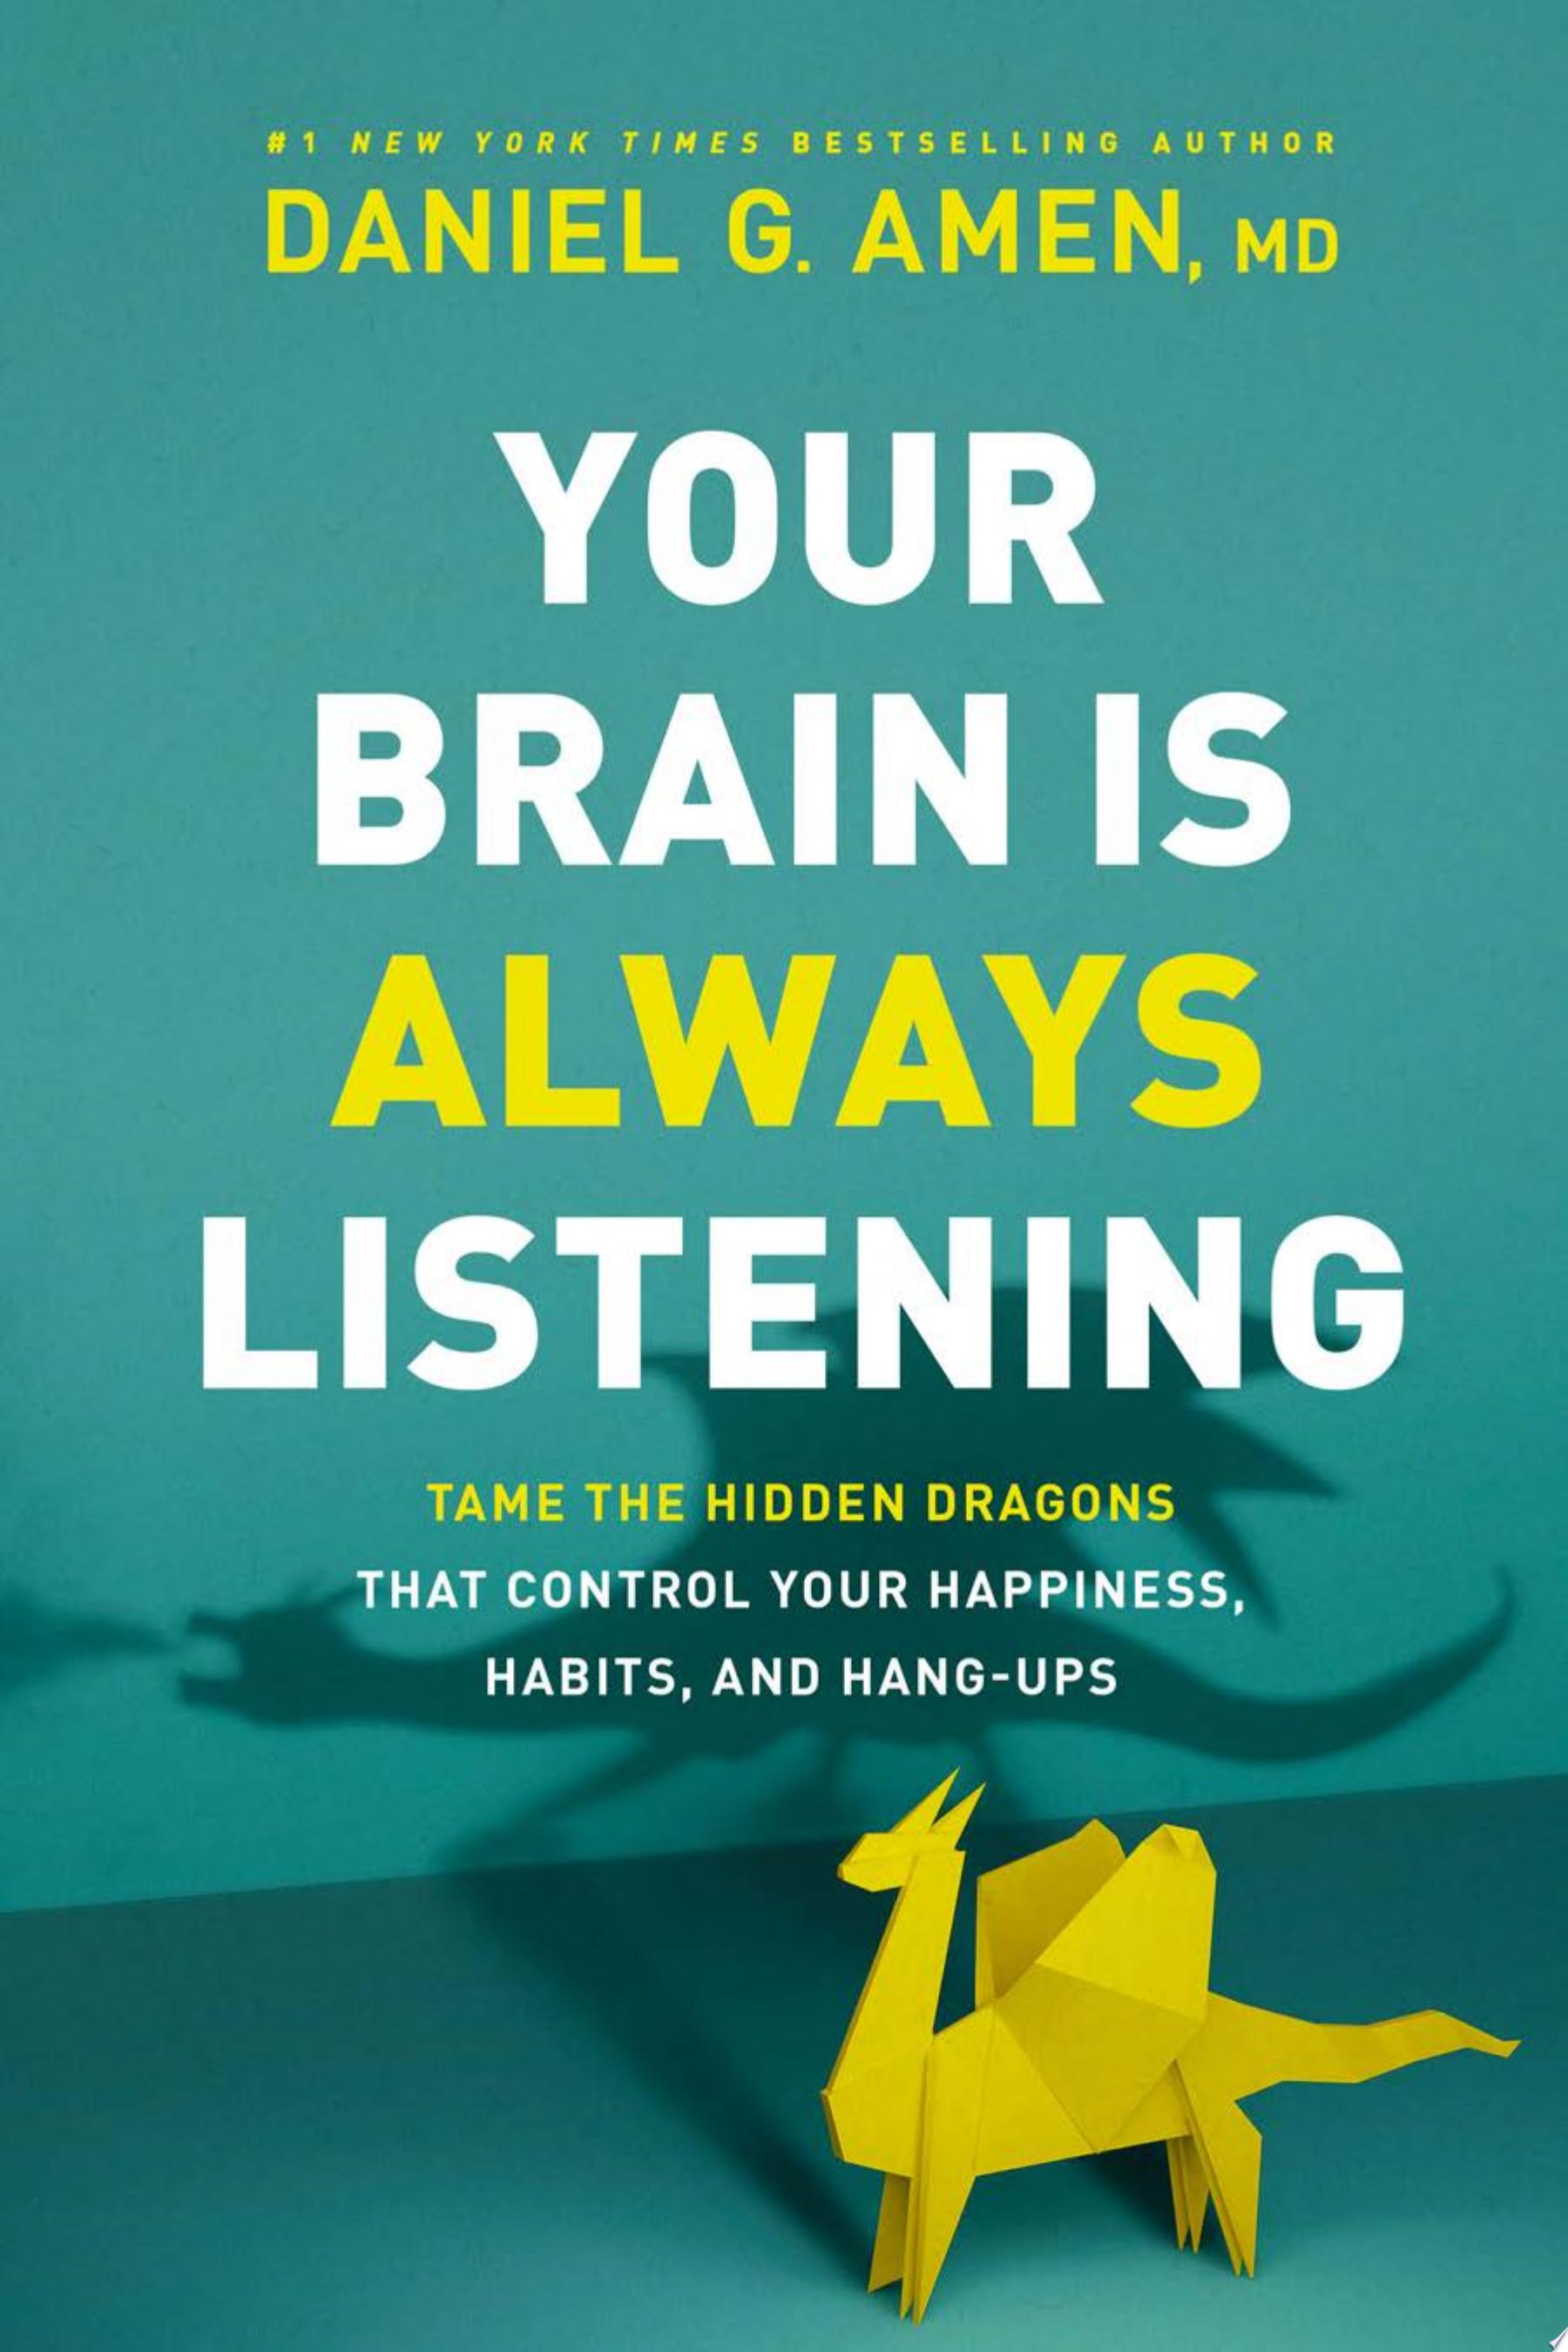 Image for "Your Brain Is Always Listening"